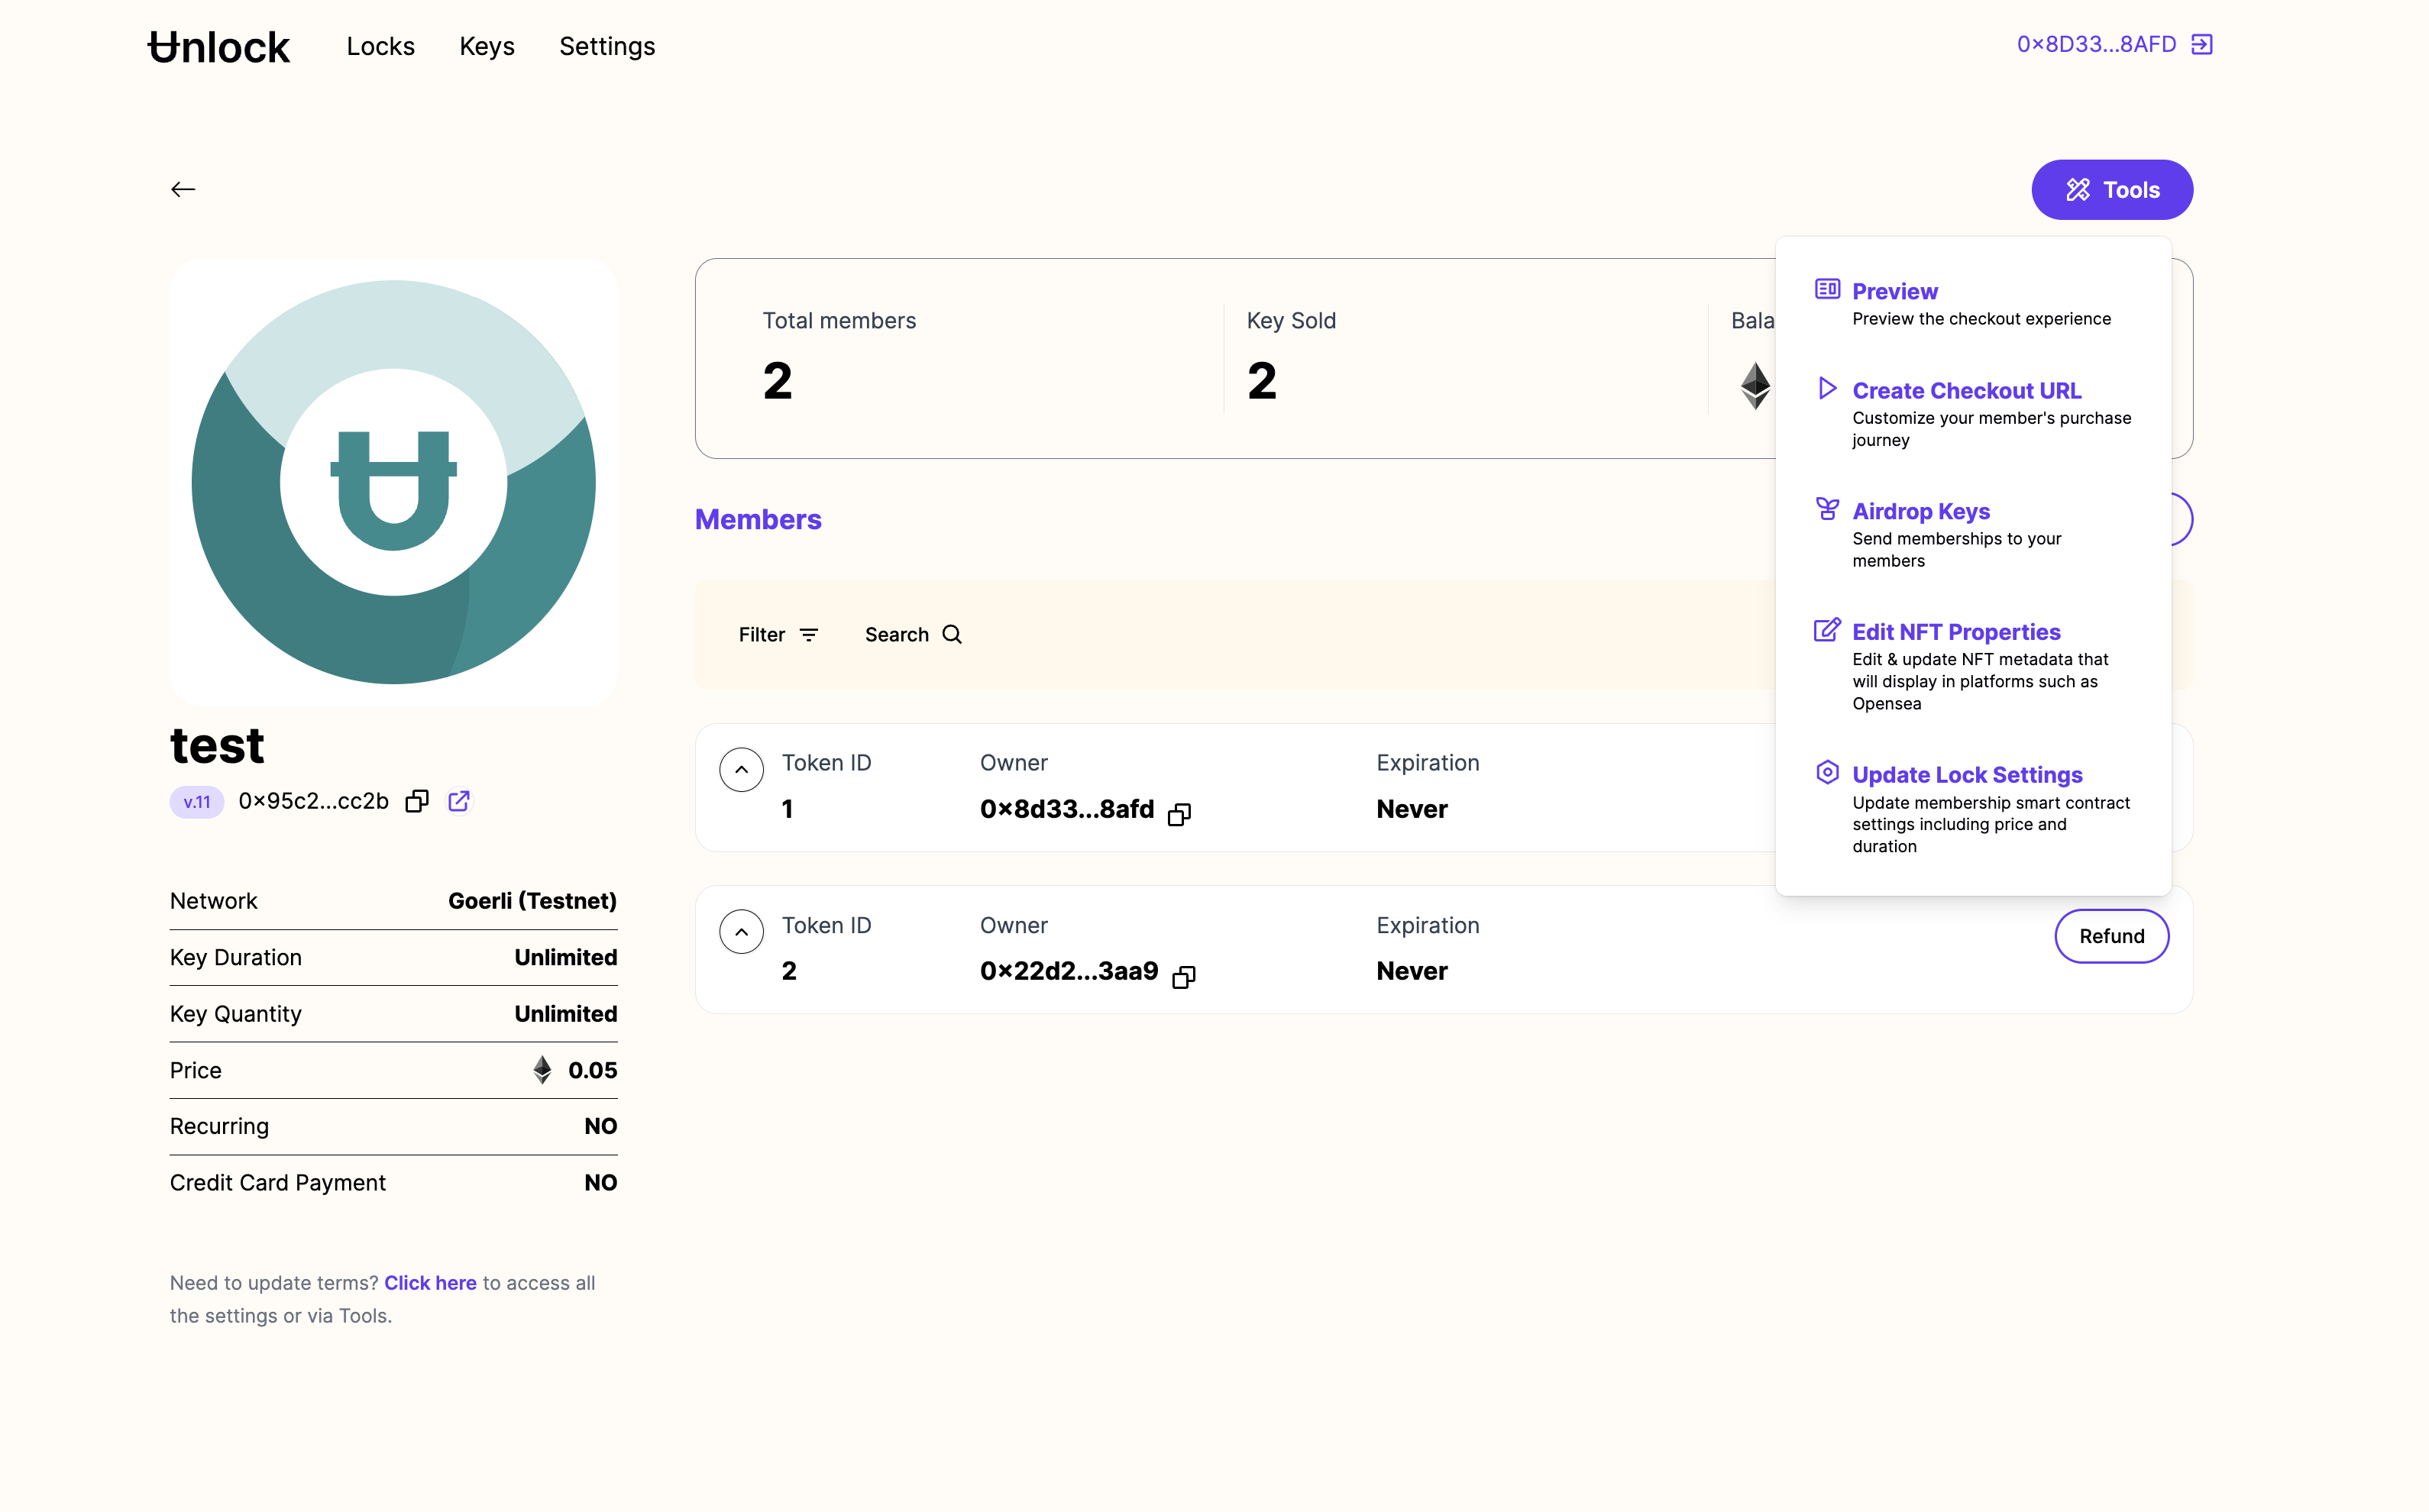 manage-lock-overview-min.png